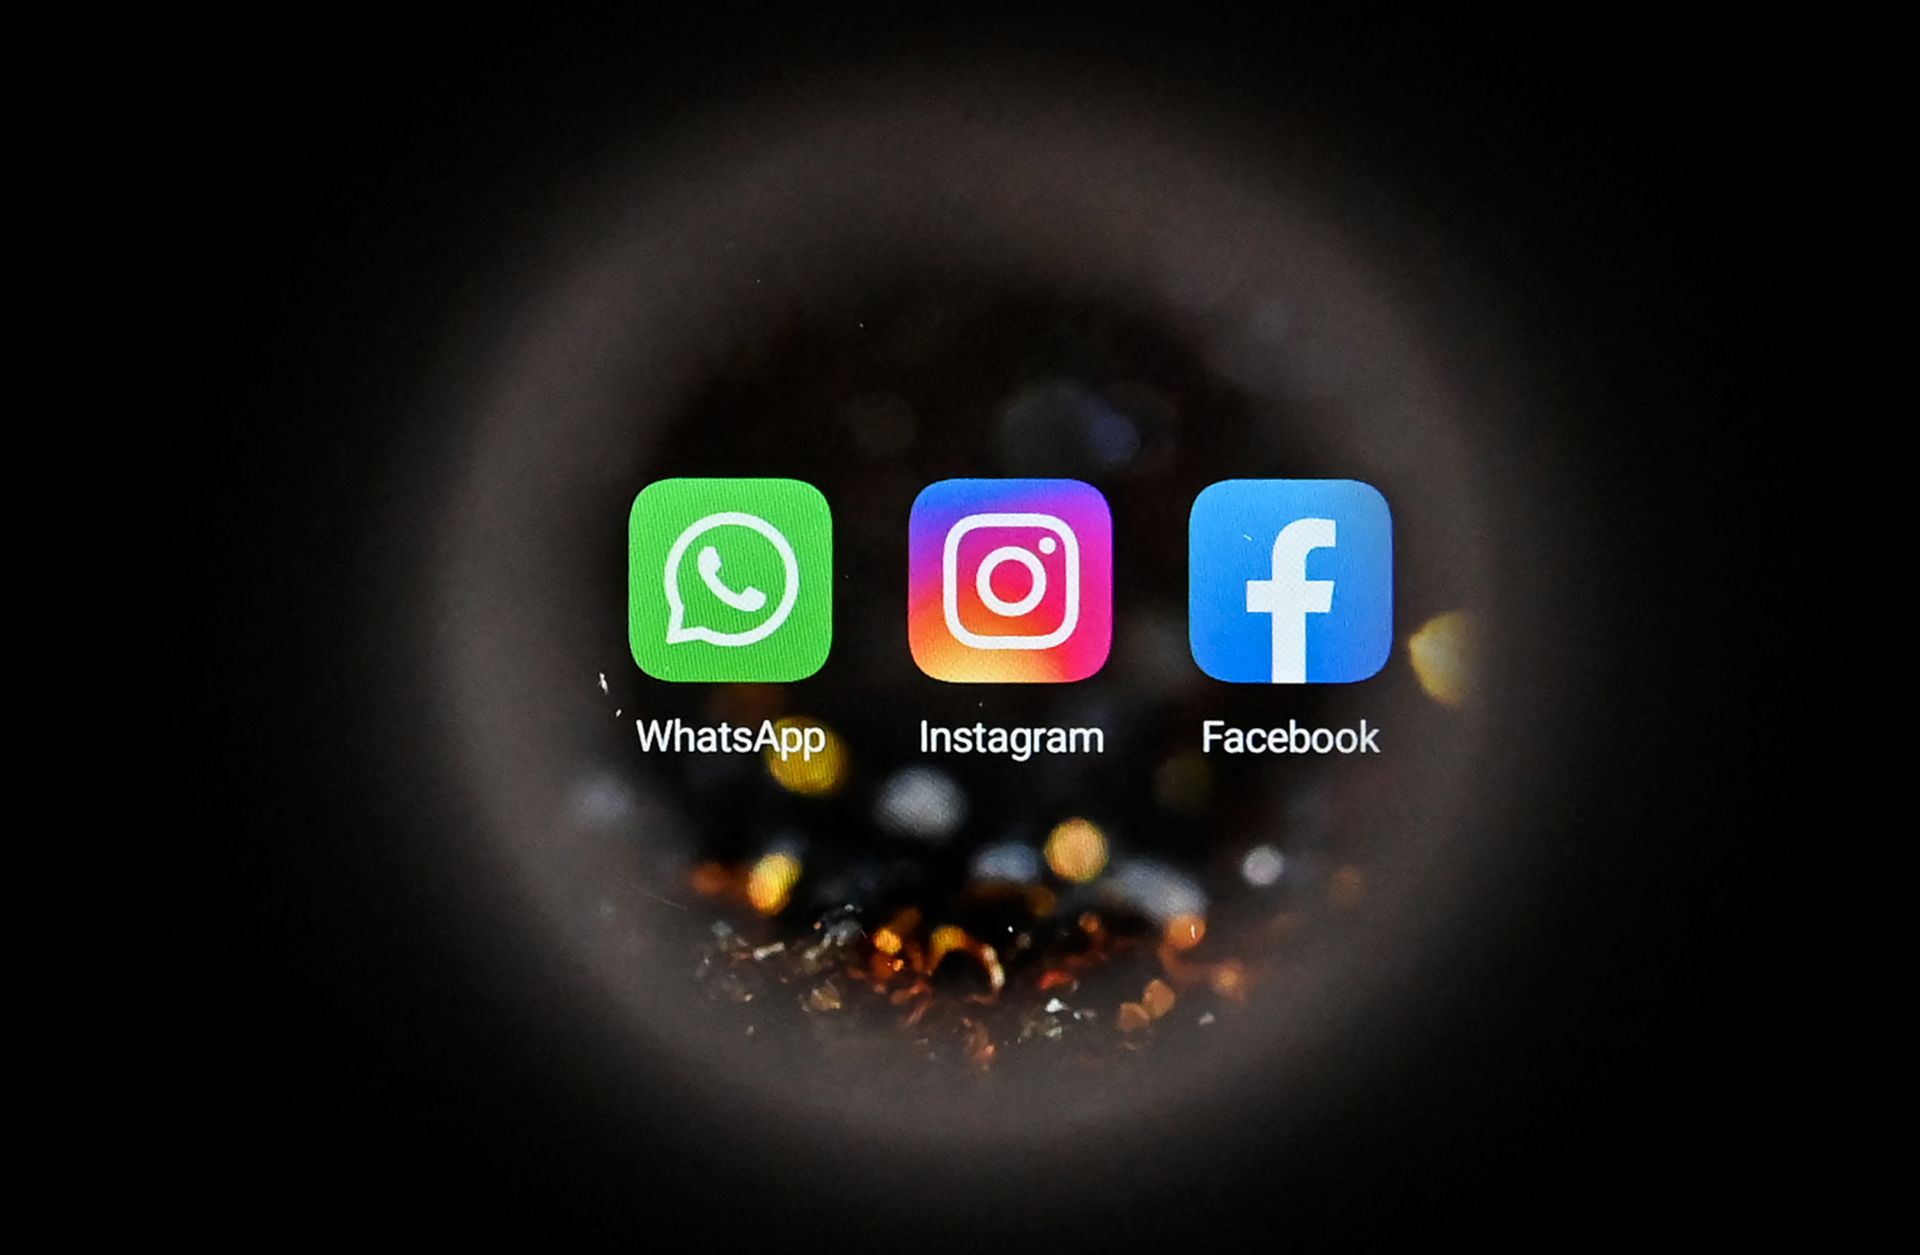 The logos of the U.S.-based social media platforms WhatsApp, Instagram and Facebook (left to right) are seen on a smartphone screen in Moscow, Russia, on Oct. 5, 2021. 